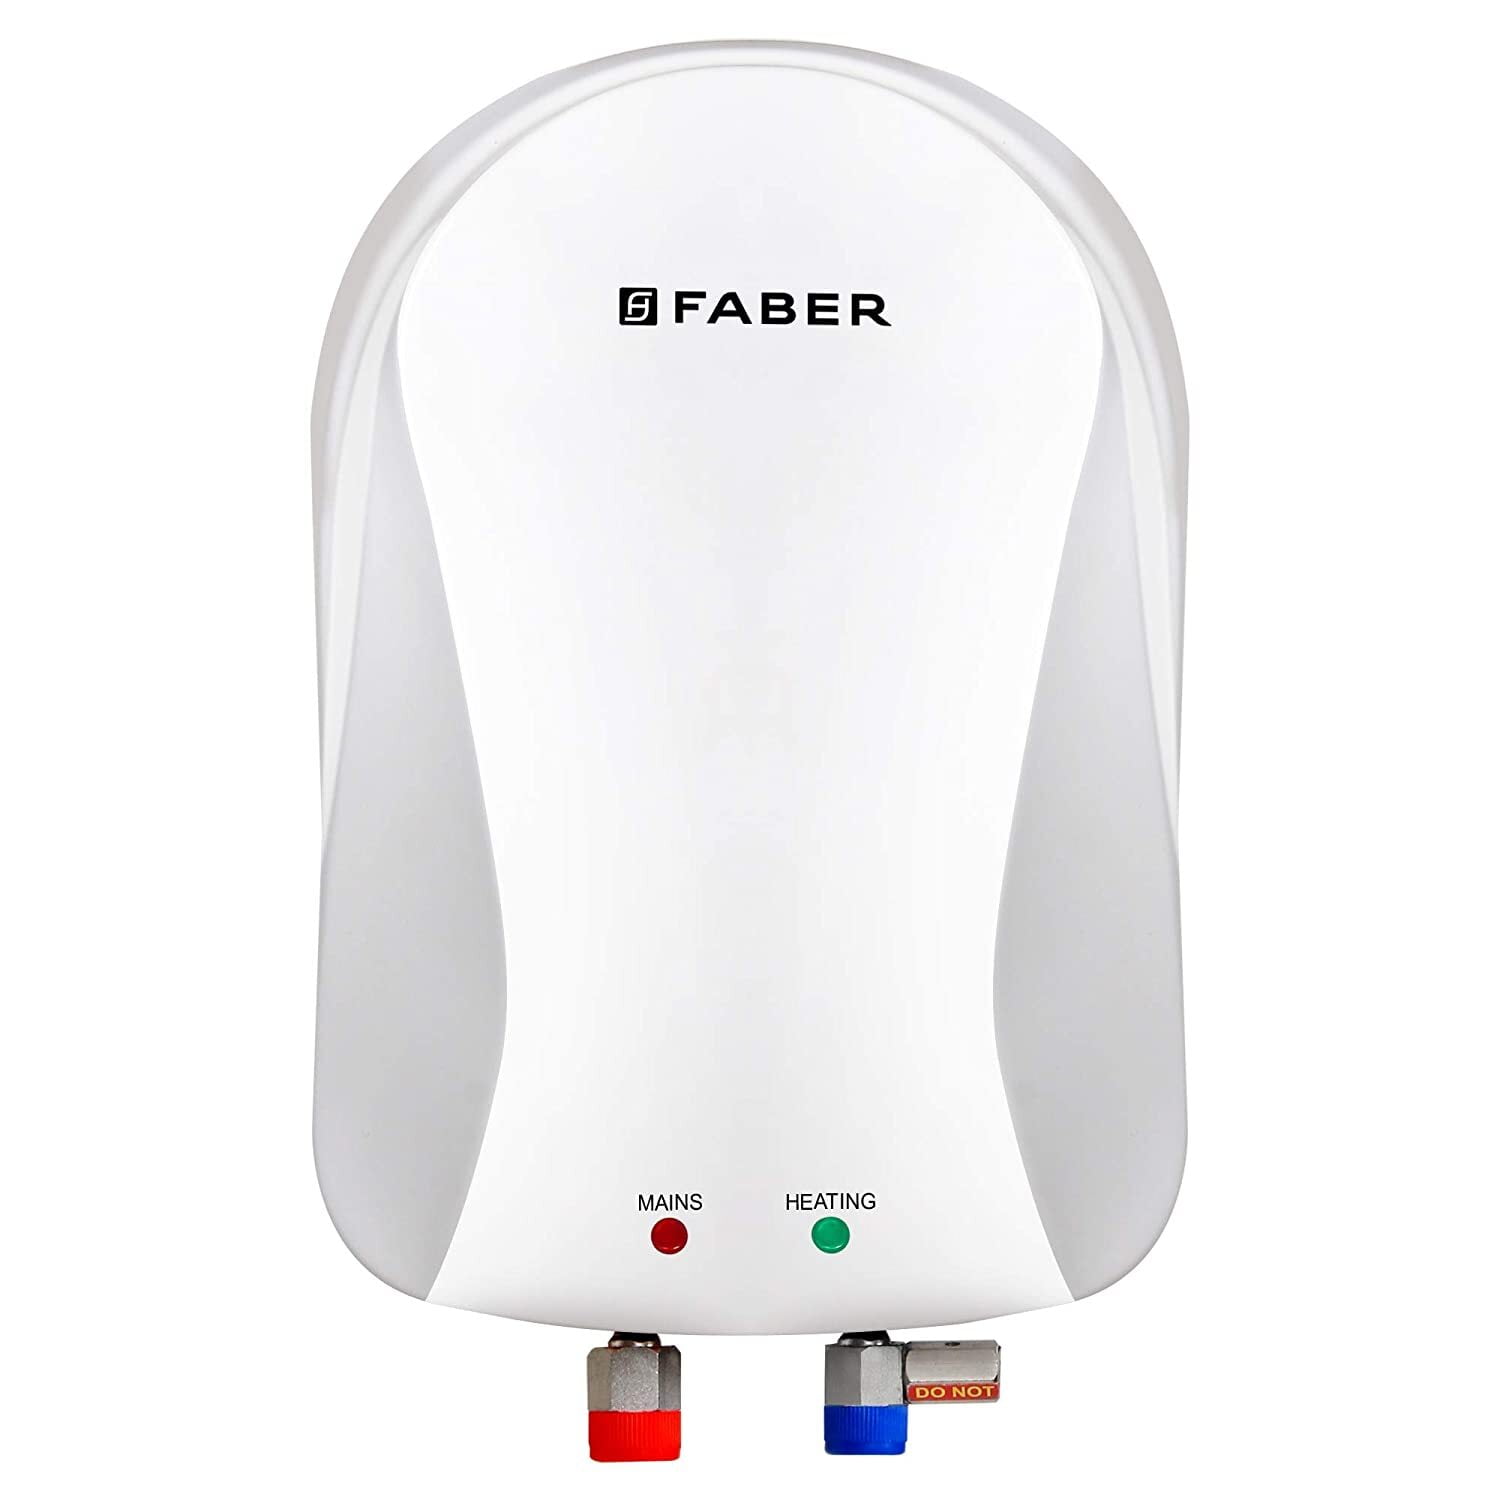 Faber 3L Water Heater On Dillimall.Com